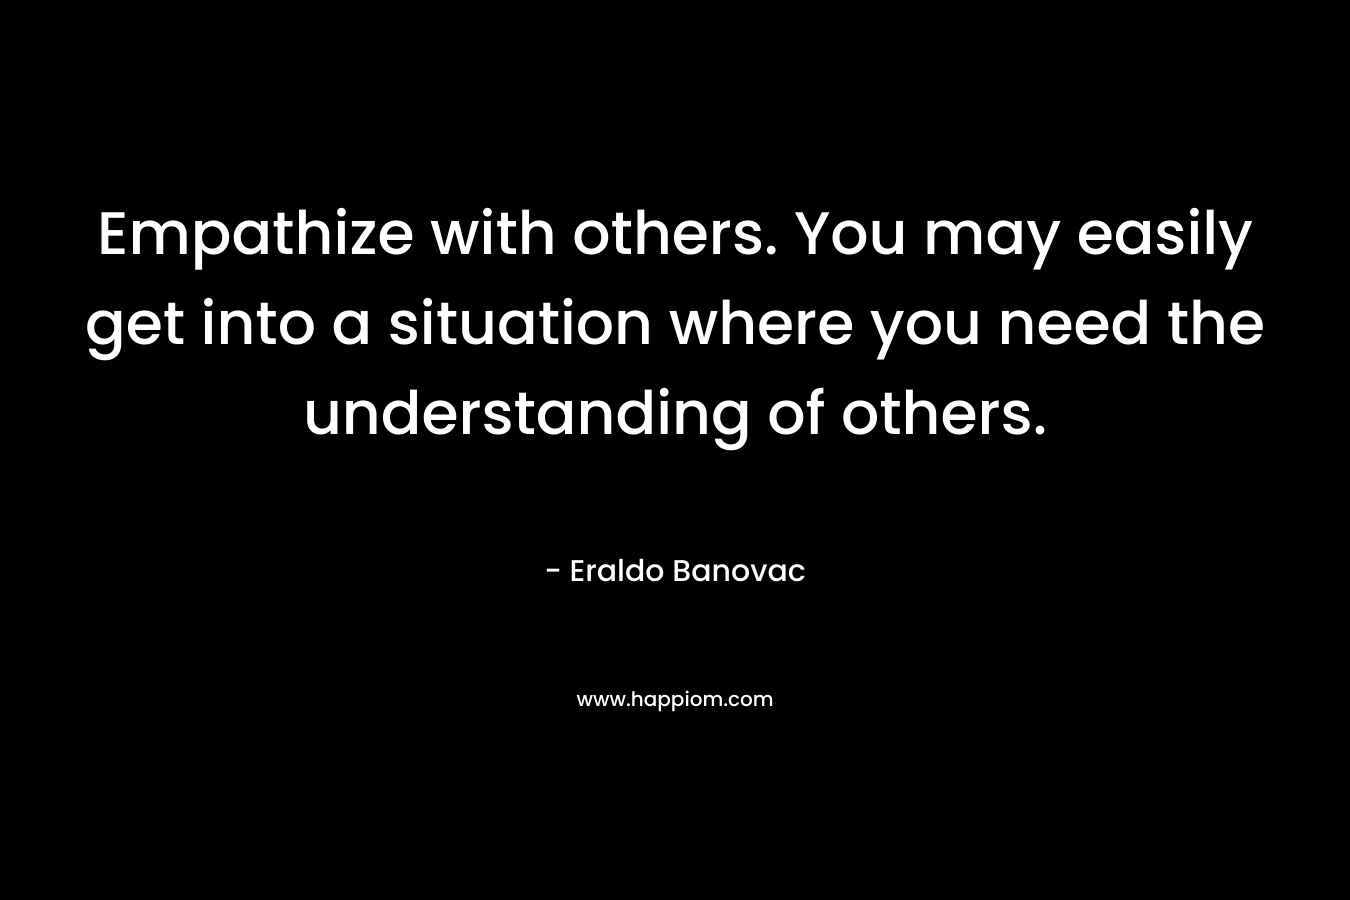 Empathize with others. You may easily get into a situation where you need the understanding of others.